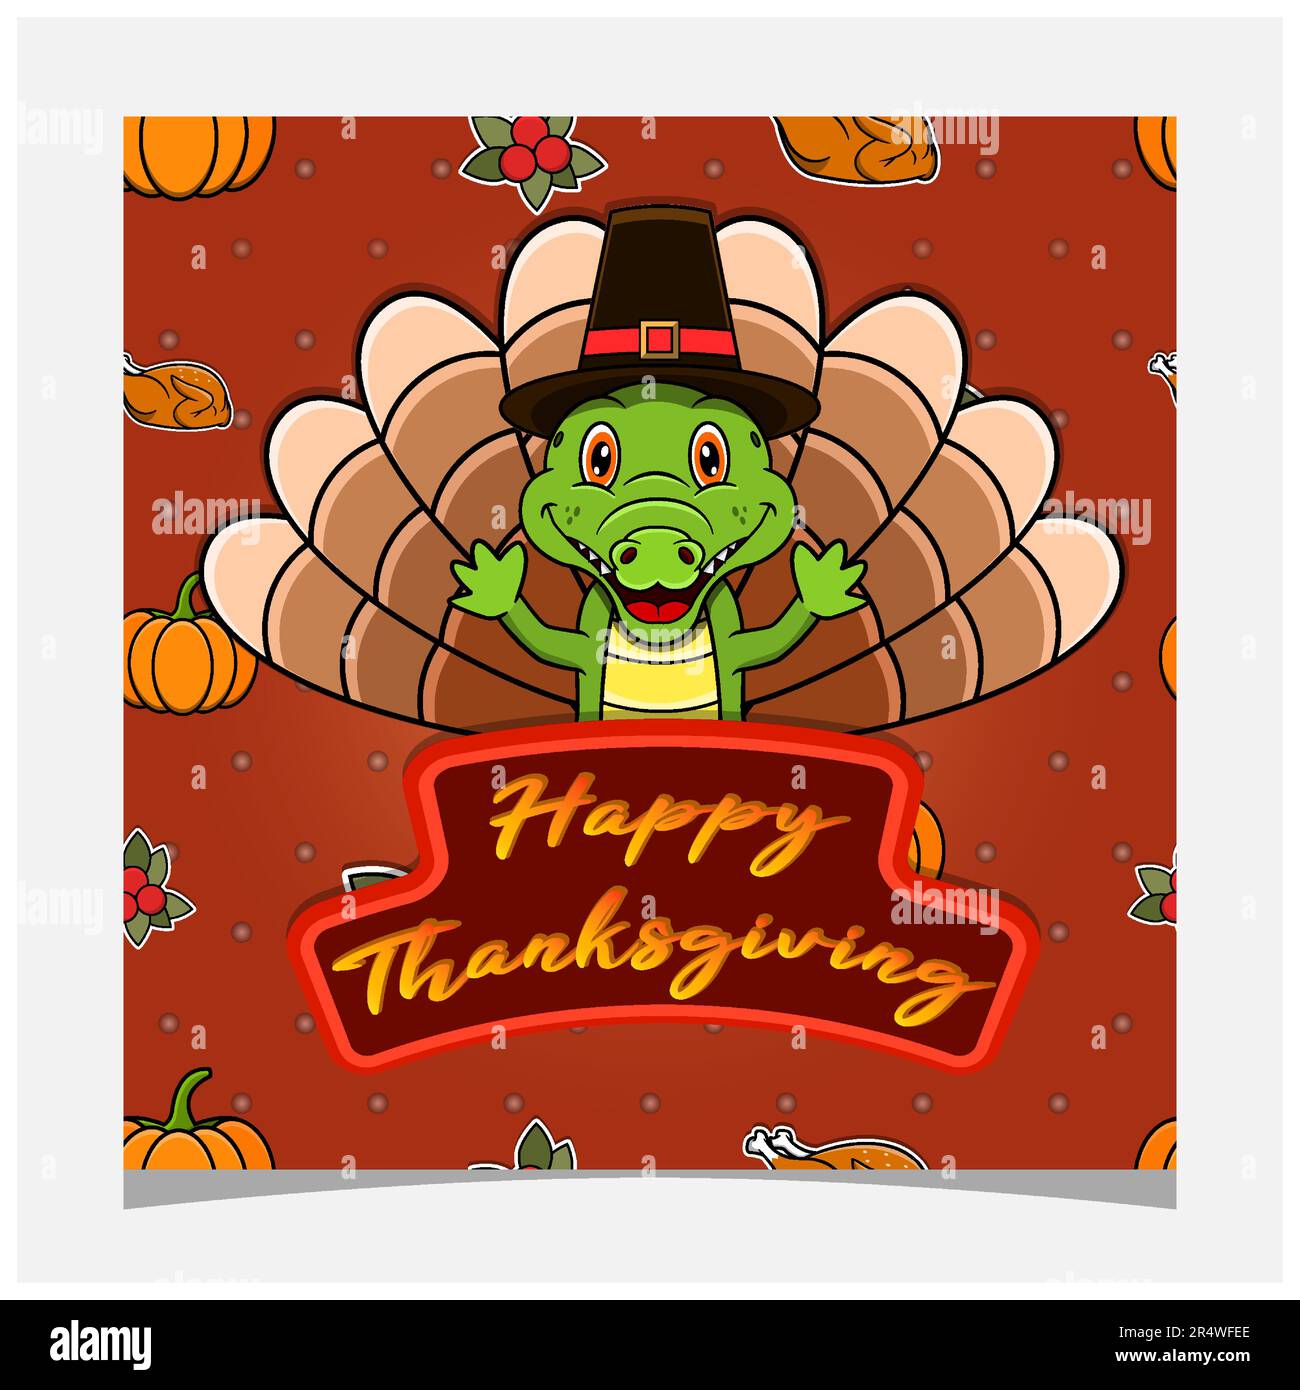 Happy Thanksgiving Card With Cute Crocodile Character Design. Greeting Card, Poster, Flyer and Invitation. Vector and Illustration. Stock Vector